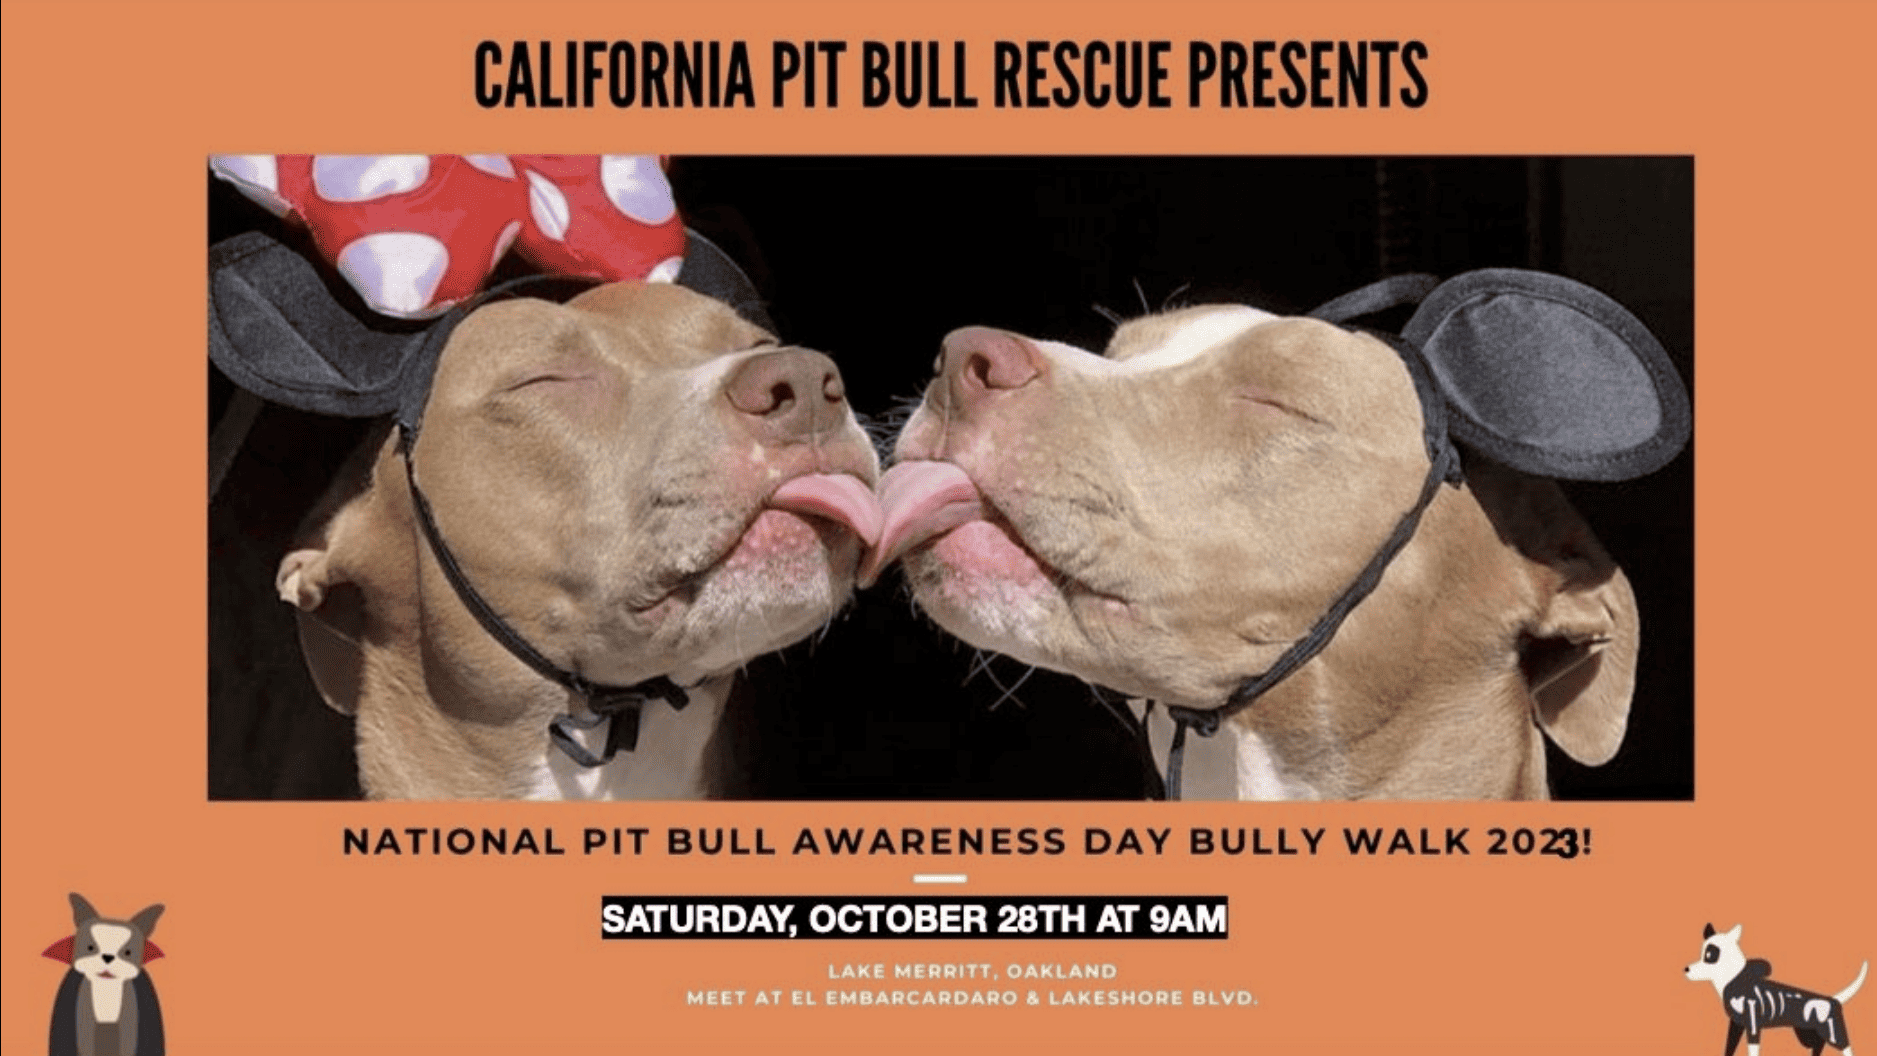 pit bulls licking each other